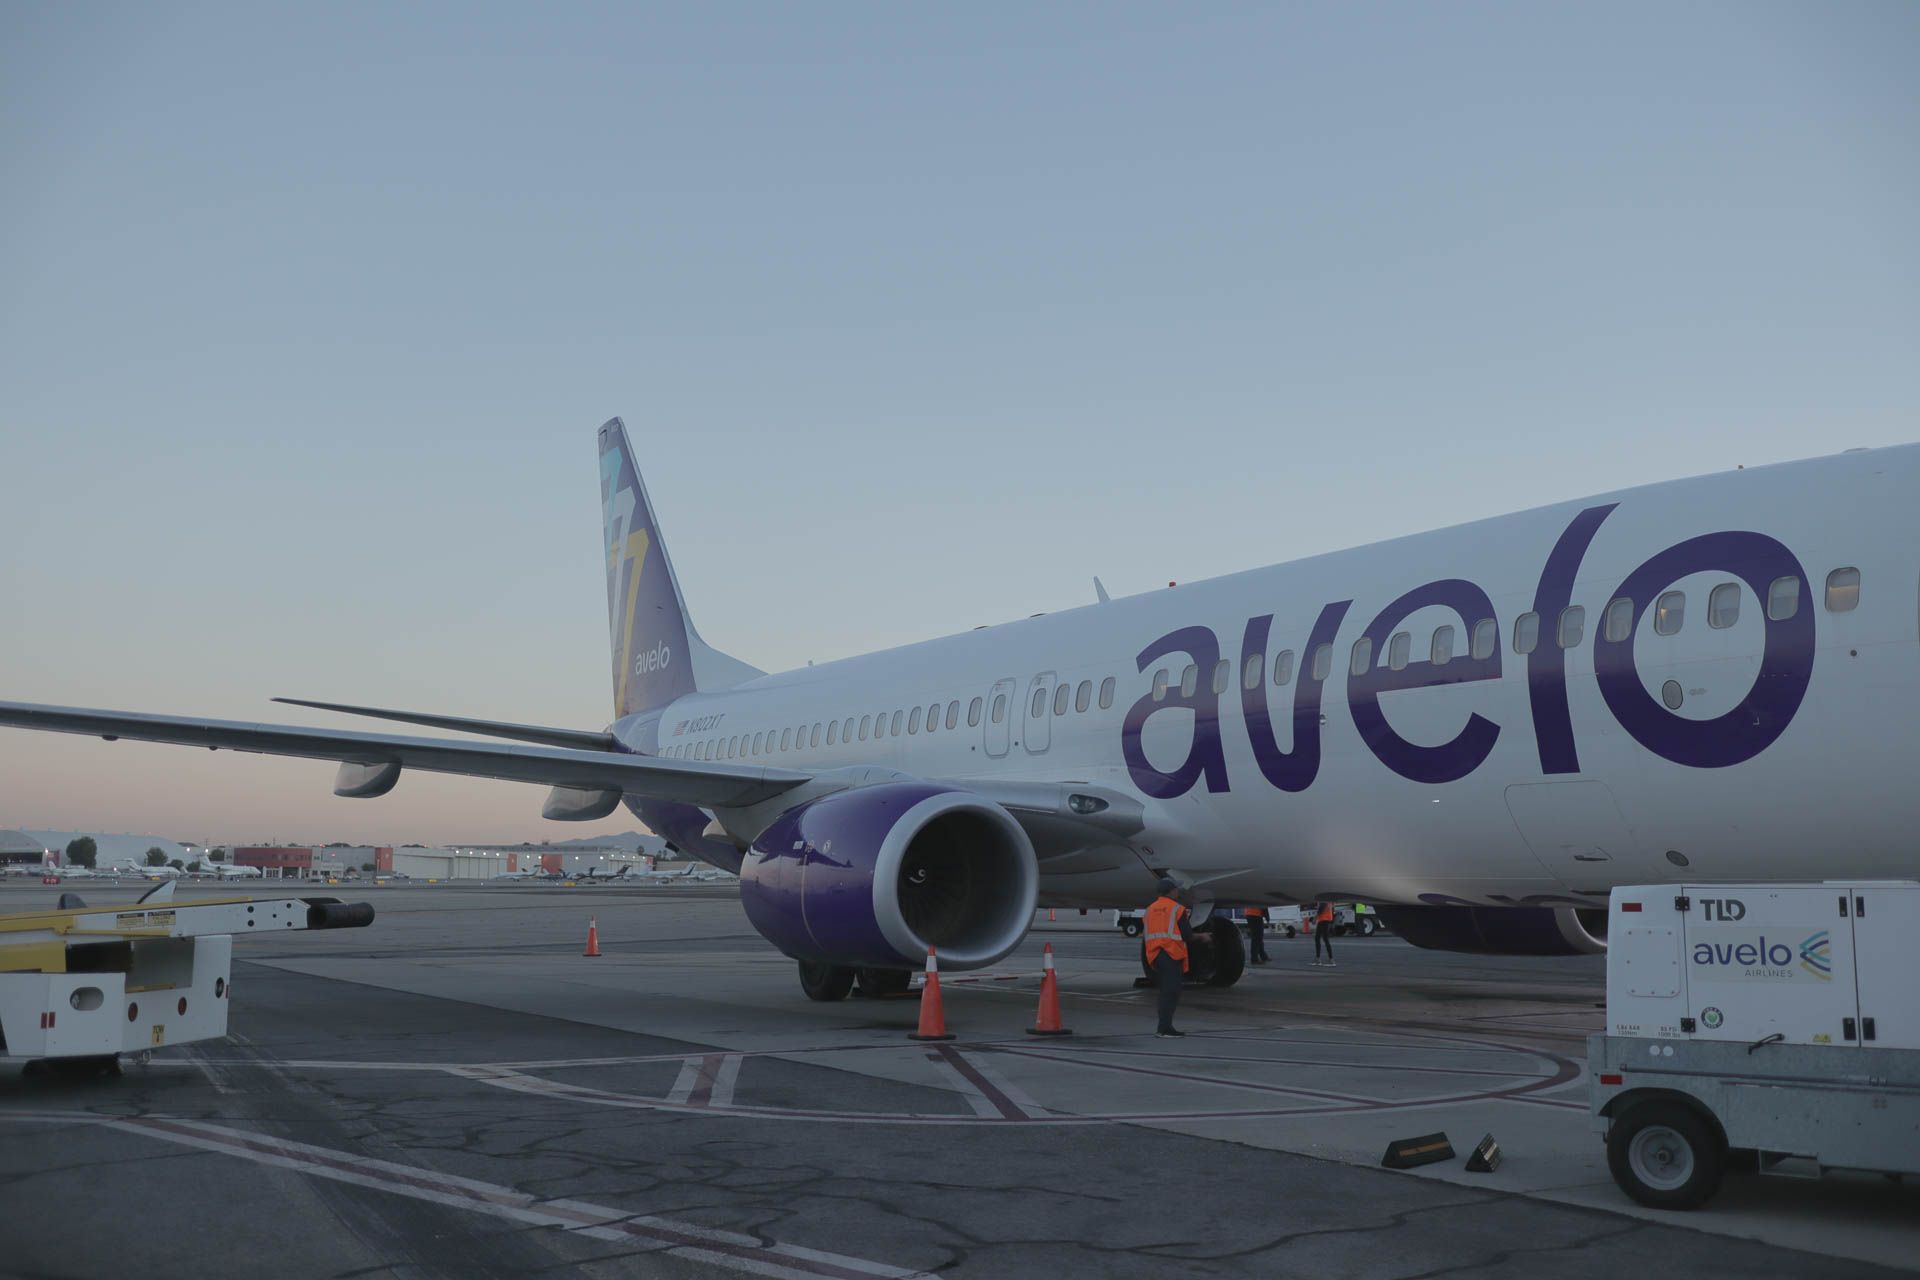 Avelo Airlines Boeing 737 at gate at BUR